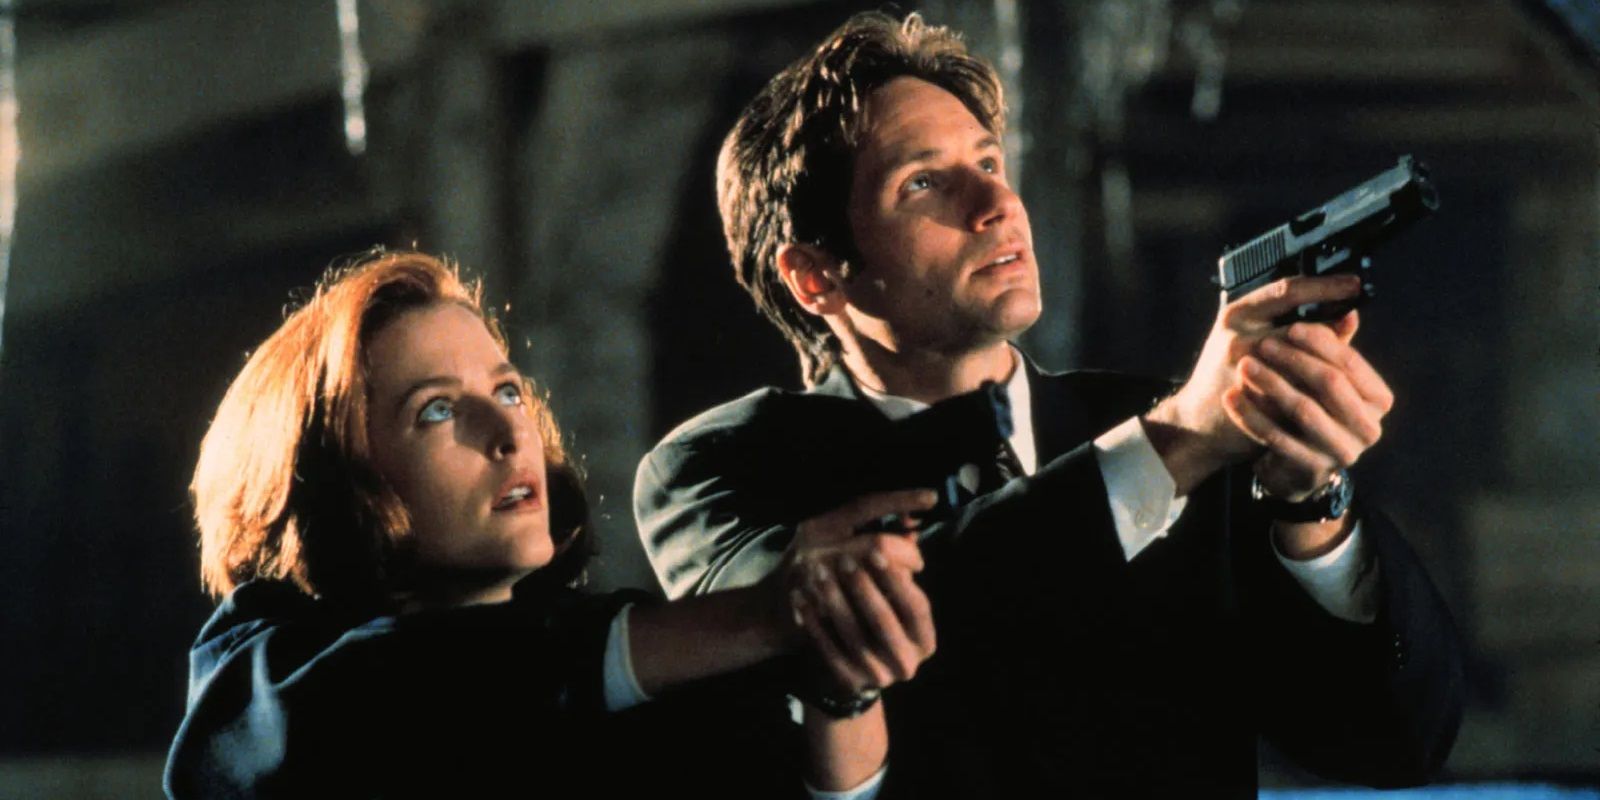 Mulder (David Duchovny) and Scully (Gillian Anderson) point their guns up toward the sky in The X-Files